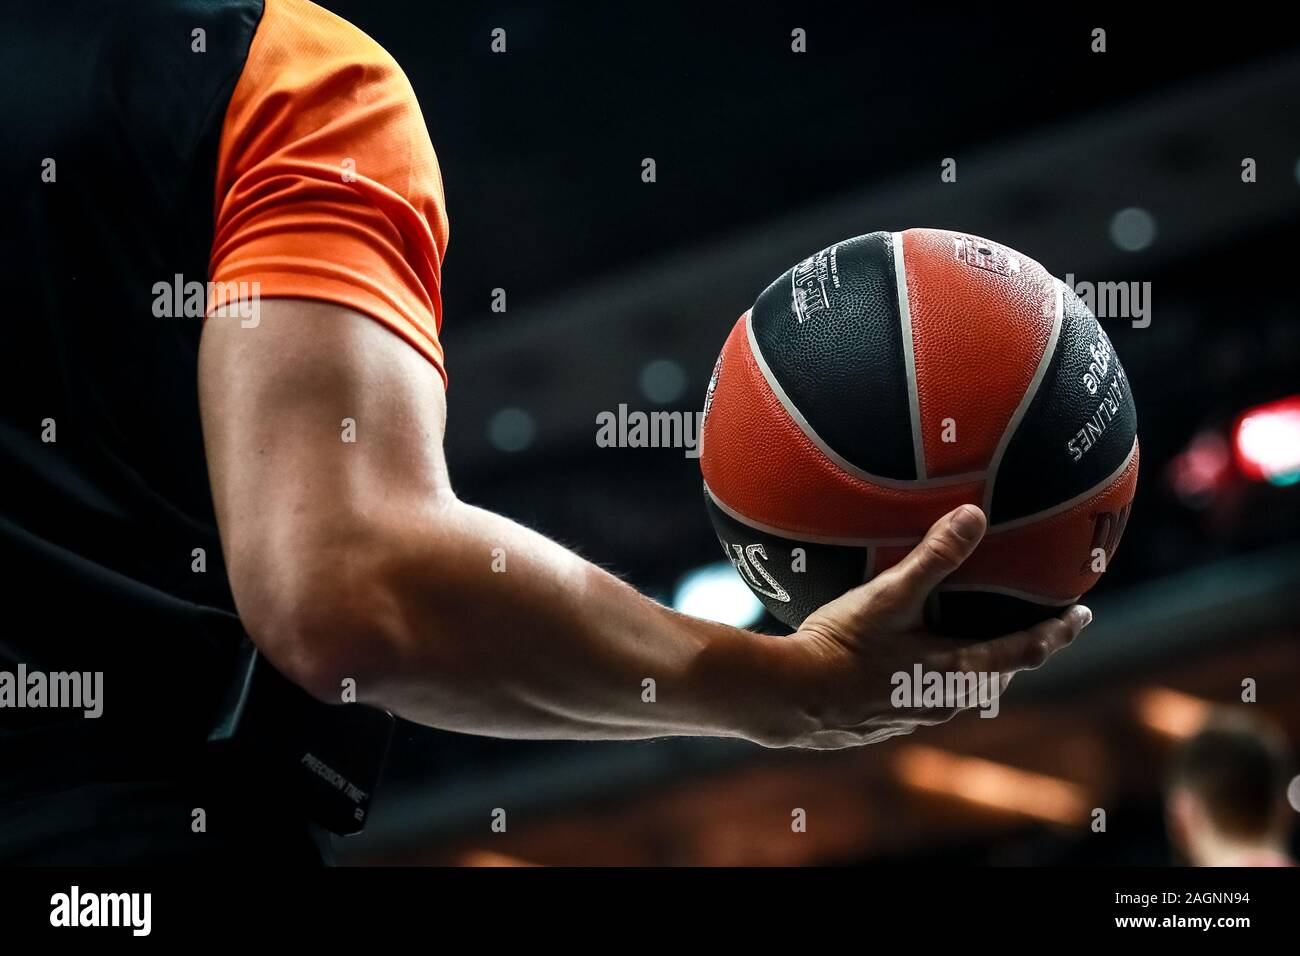 Berlin, Germany, December 18, 2019:a referee holds the official basket game ball during a EuroLeague match between Alba Berlin and FC Bayern Munich Stock Photo